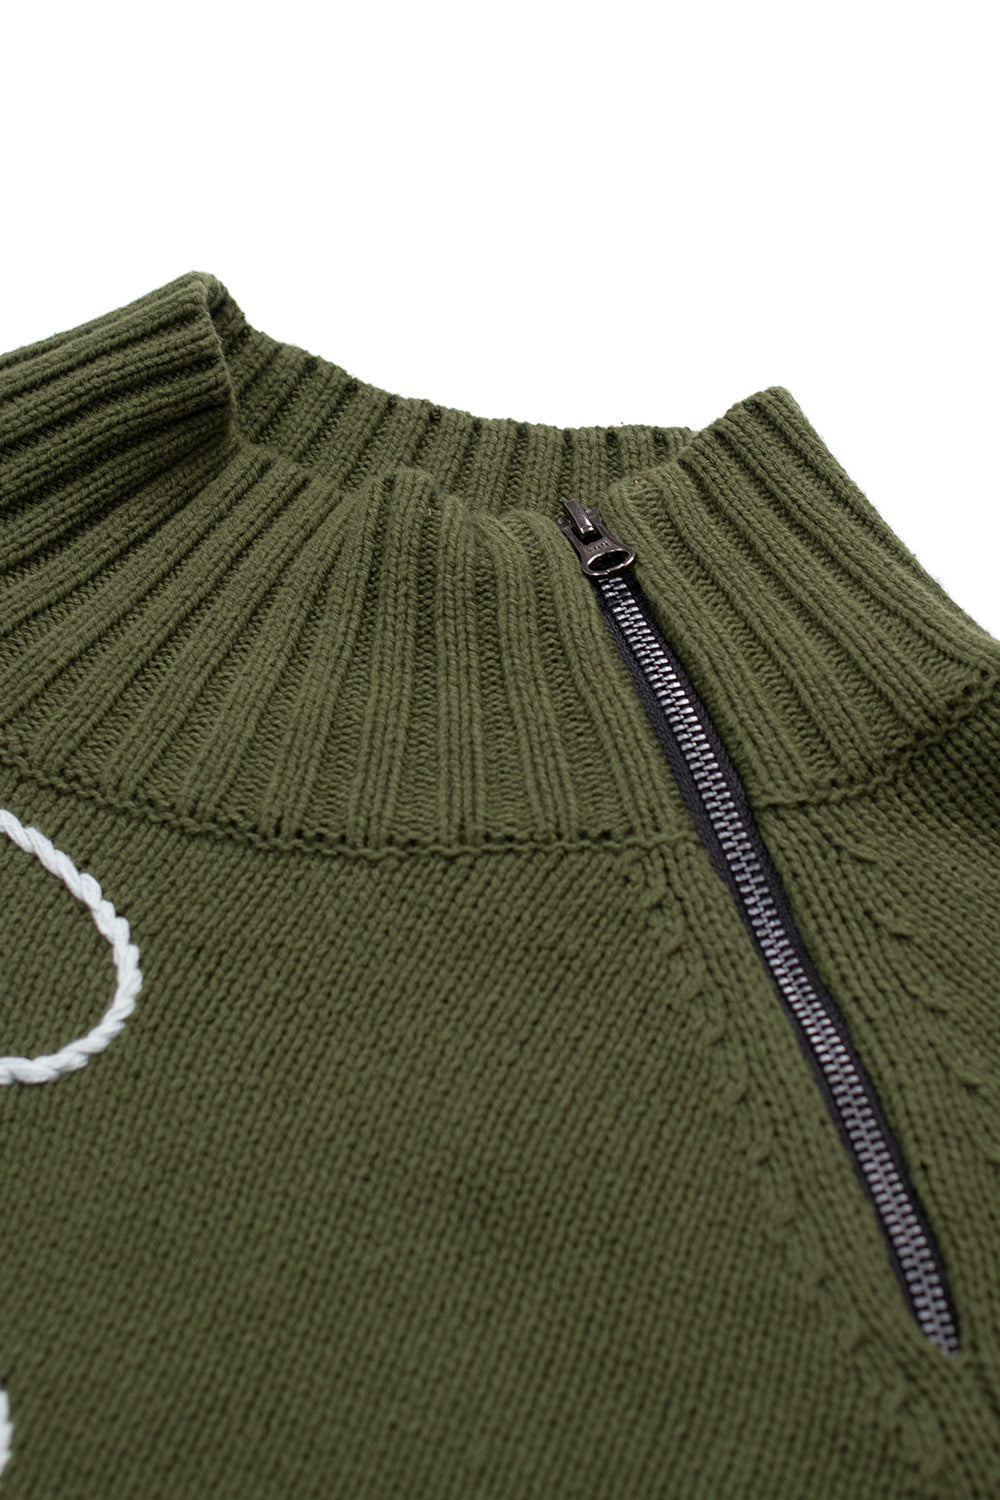 Perks And Mini Relief High Neck Knit Olive Leaf - BONKERS